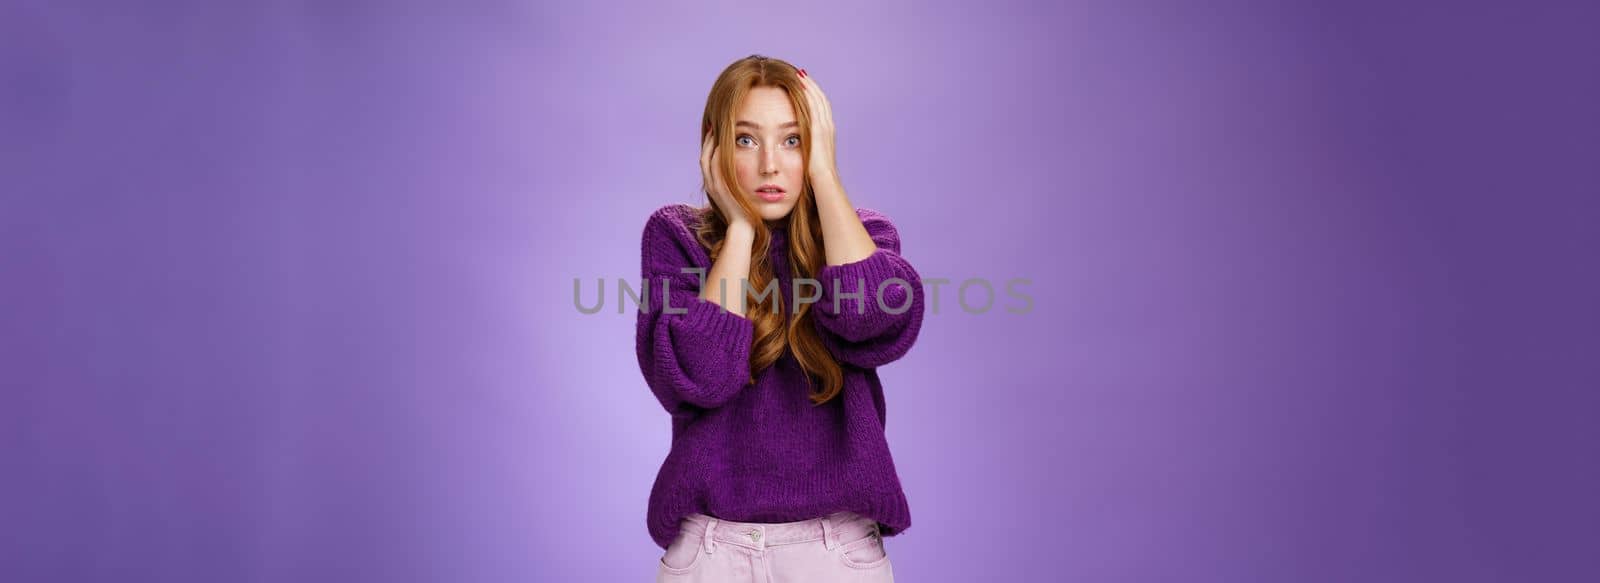 Girl in stupor feeling shocked and troubled as realising huge mistake made, holding hands on face and head popping eyes at camera confused and hopeless, posing anxious over purple background.